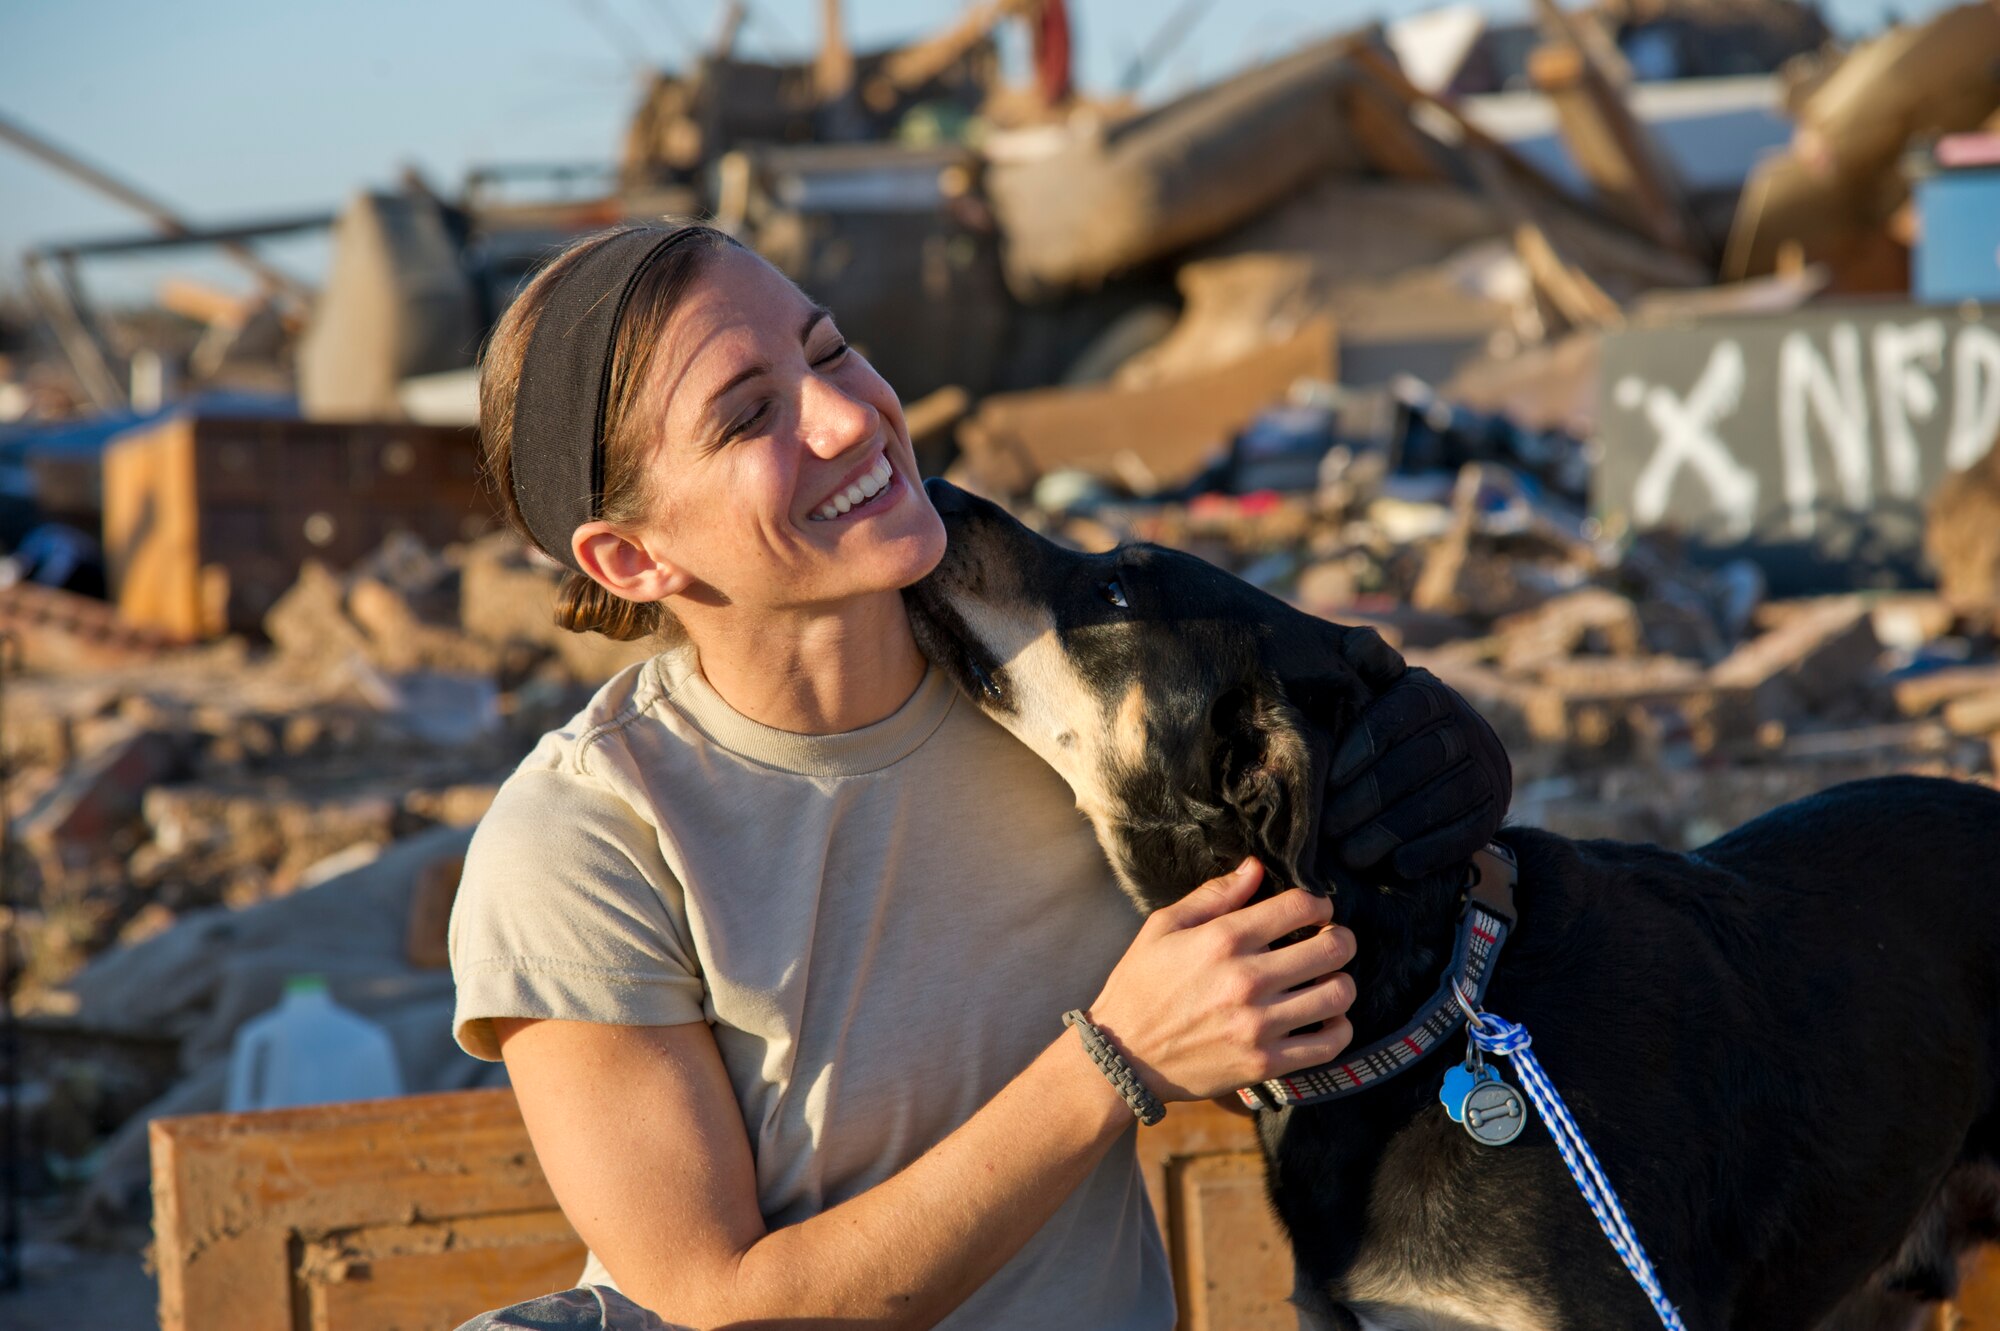 U.S. Air Force Staff Sgt. Caroline Hayworth, 4th Combat Camera Squadron, receives a friendly lick from a thankful dog expressing his excitement after pulling him from the remains of a home three days after a tornado completely destroyed his owners house, Okla., May 22, 2013. The 2 mile wide tornado demolished hundreds of houses and took lives, May 20, 2013. (Photo by Mike Meinhardt/Released)